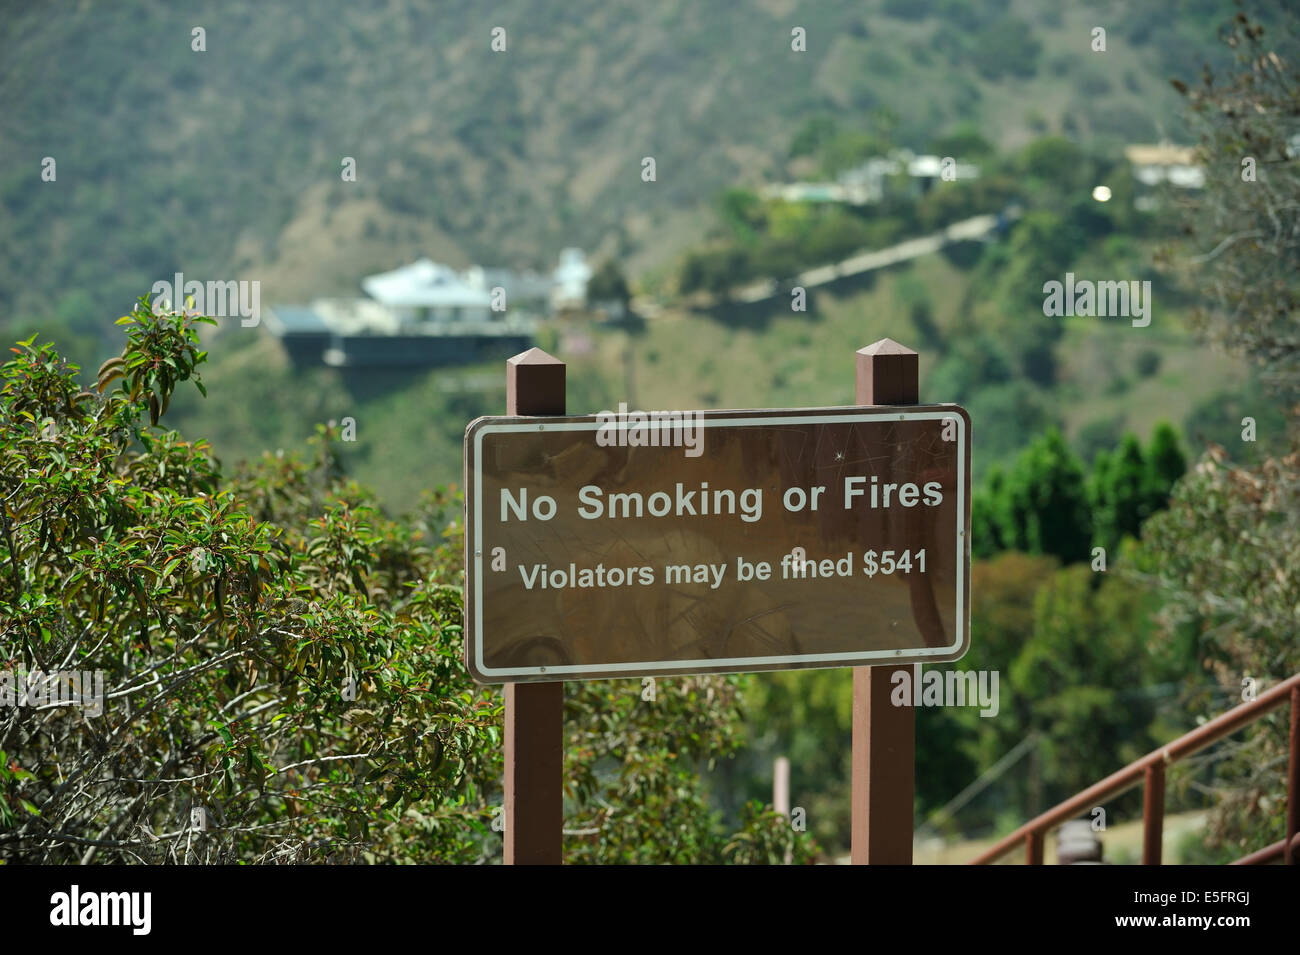 Sign warning of a very specific fine ($541) for smoking or fires Stock Photo